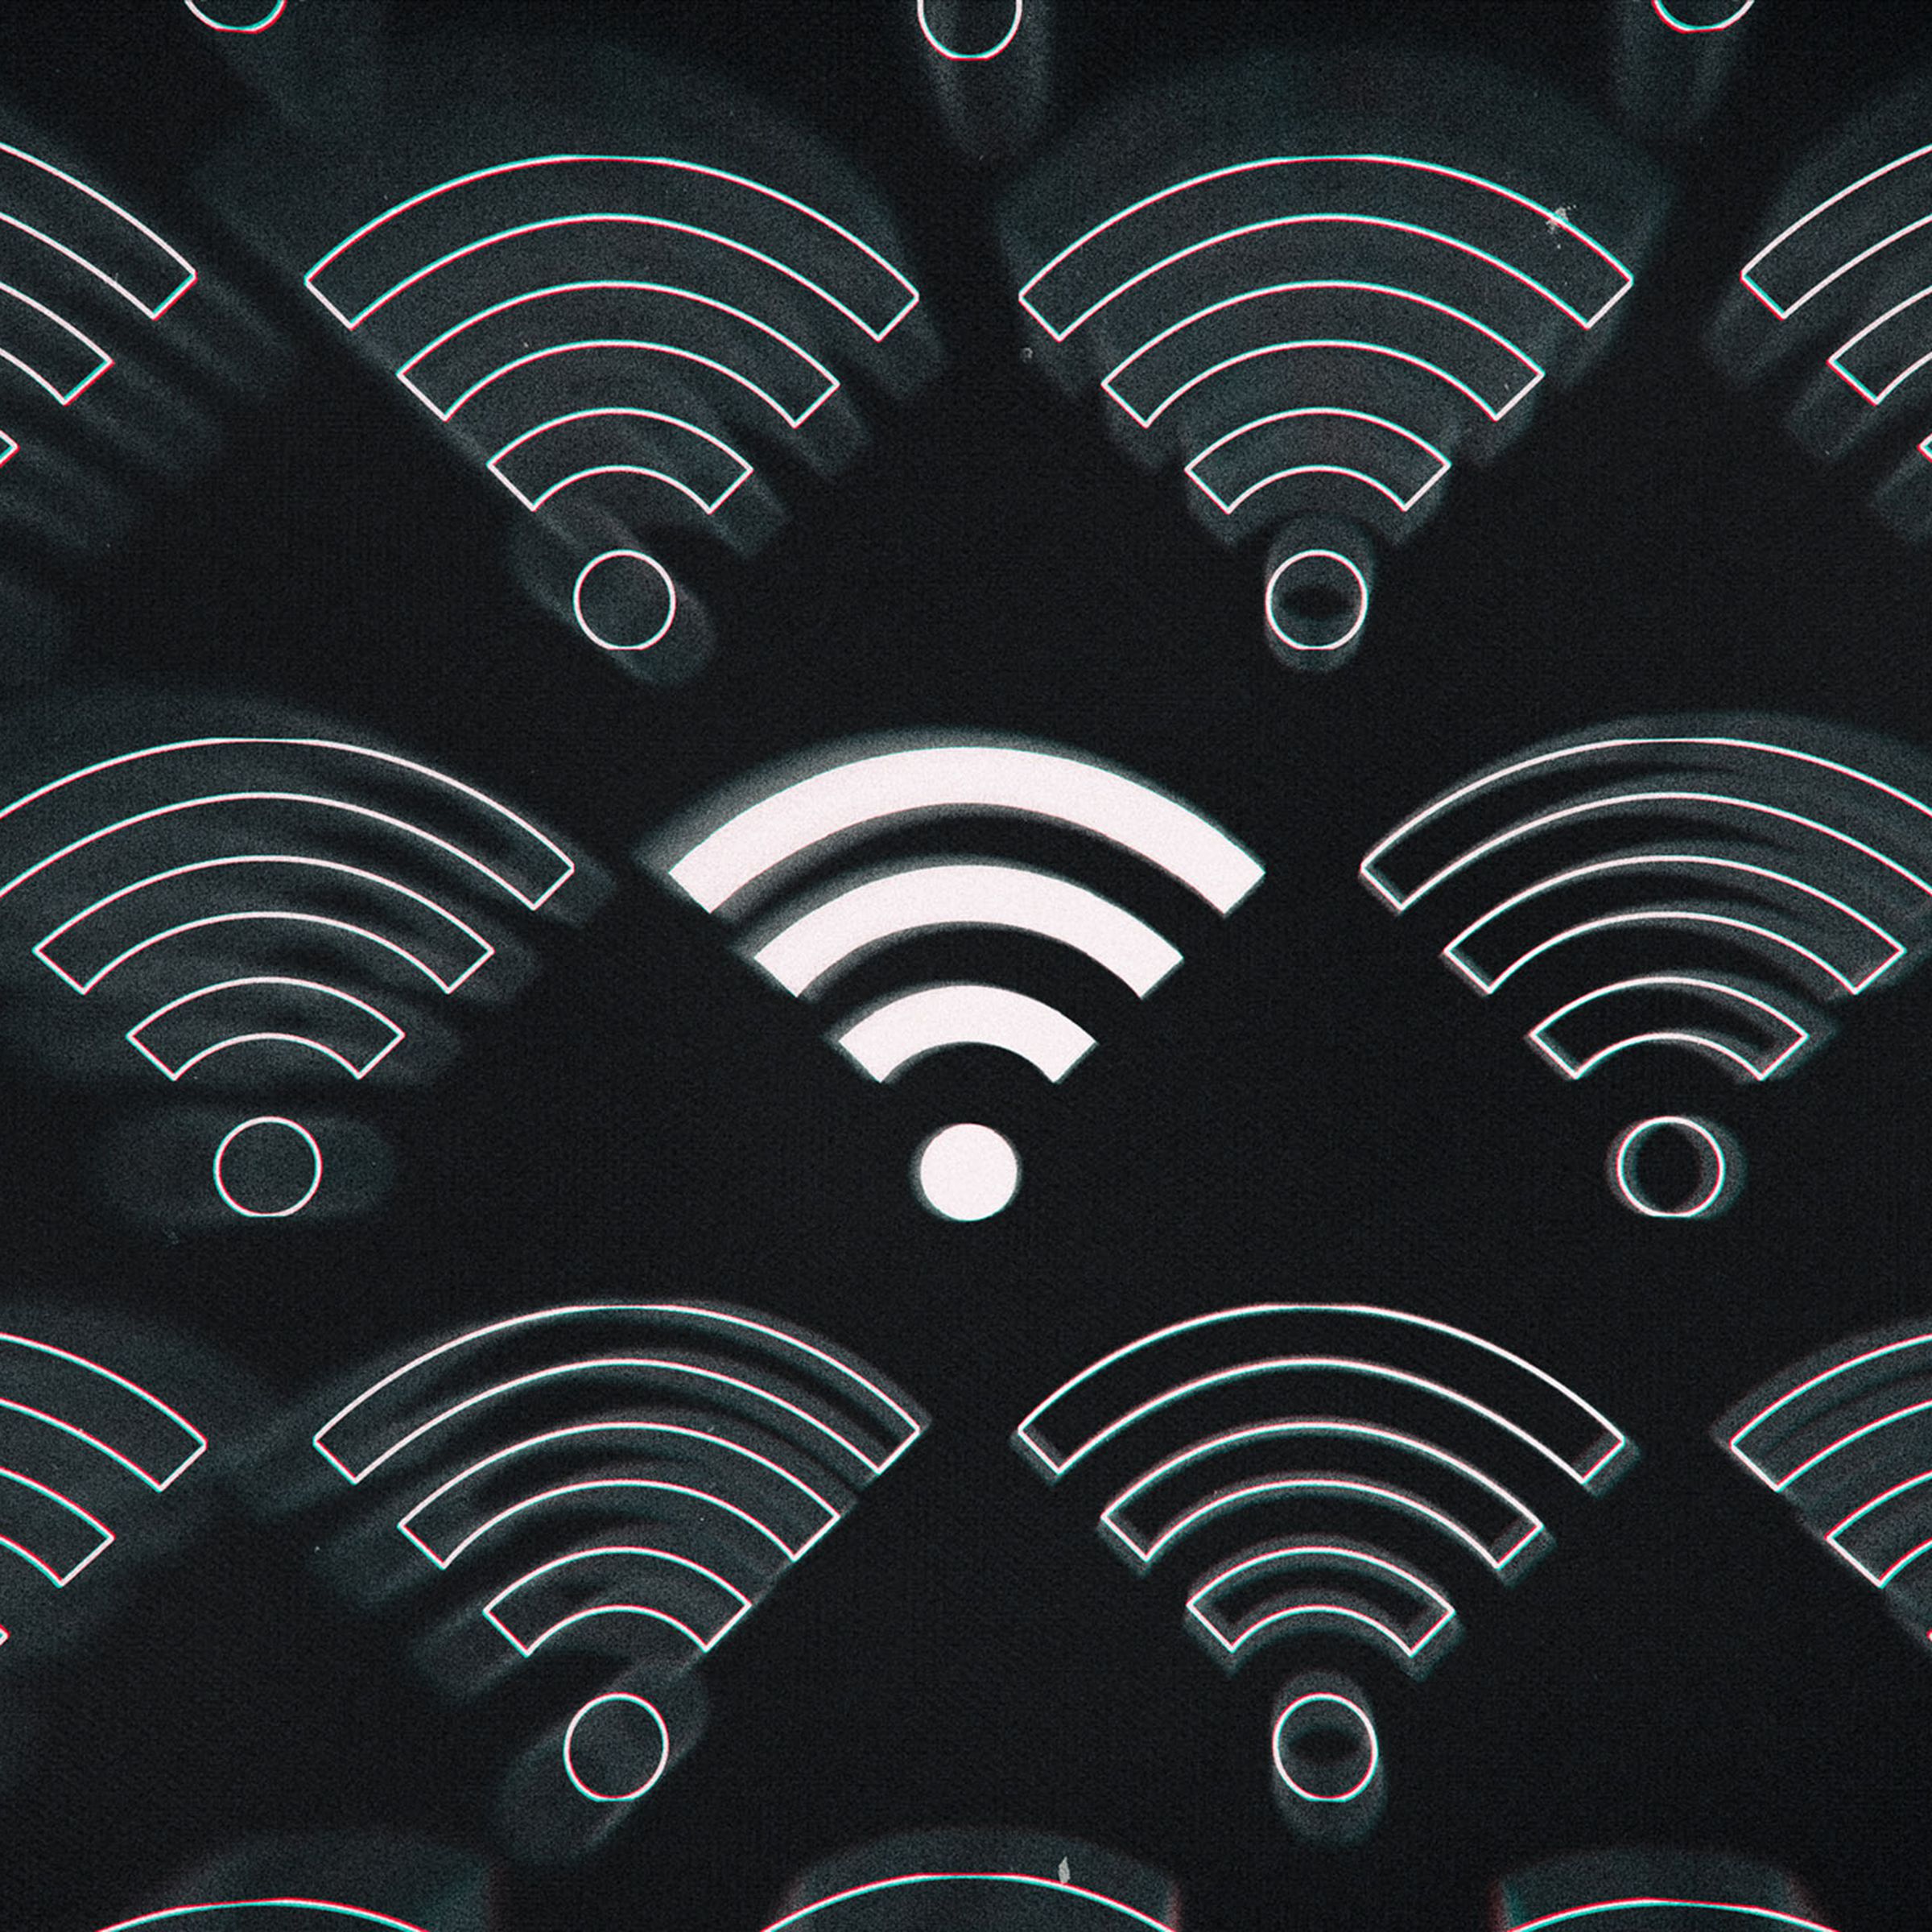 Illustration of several Wi-Fi symbols: one filled in with white and the others just outlines.